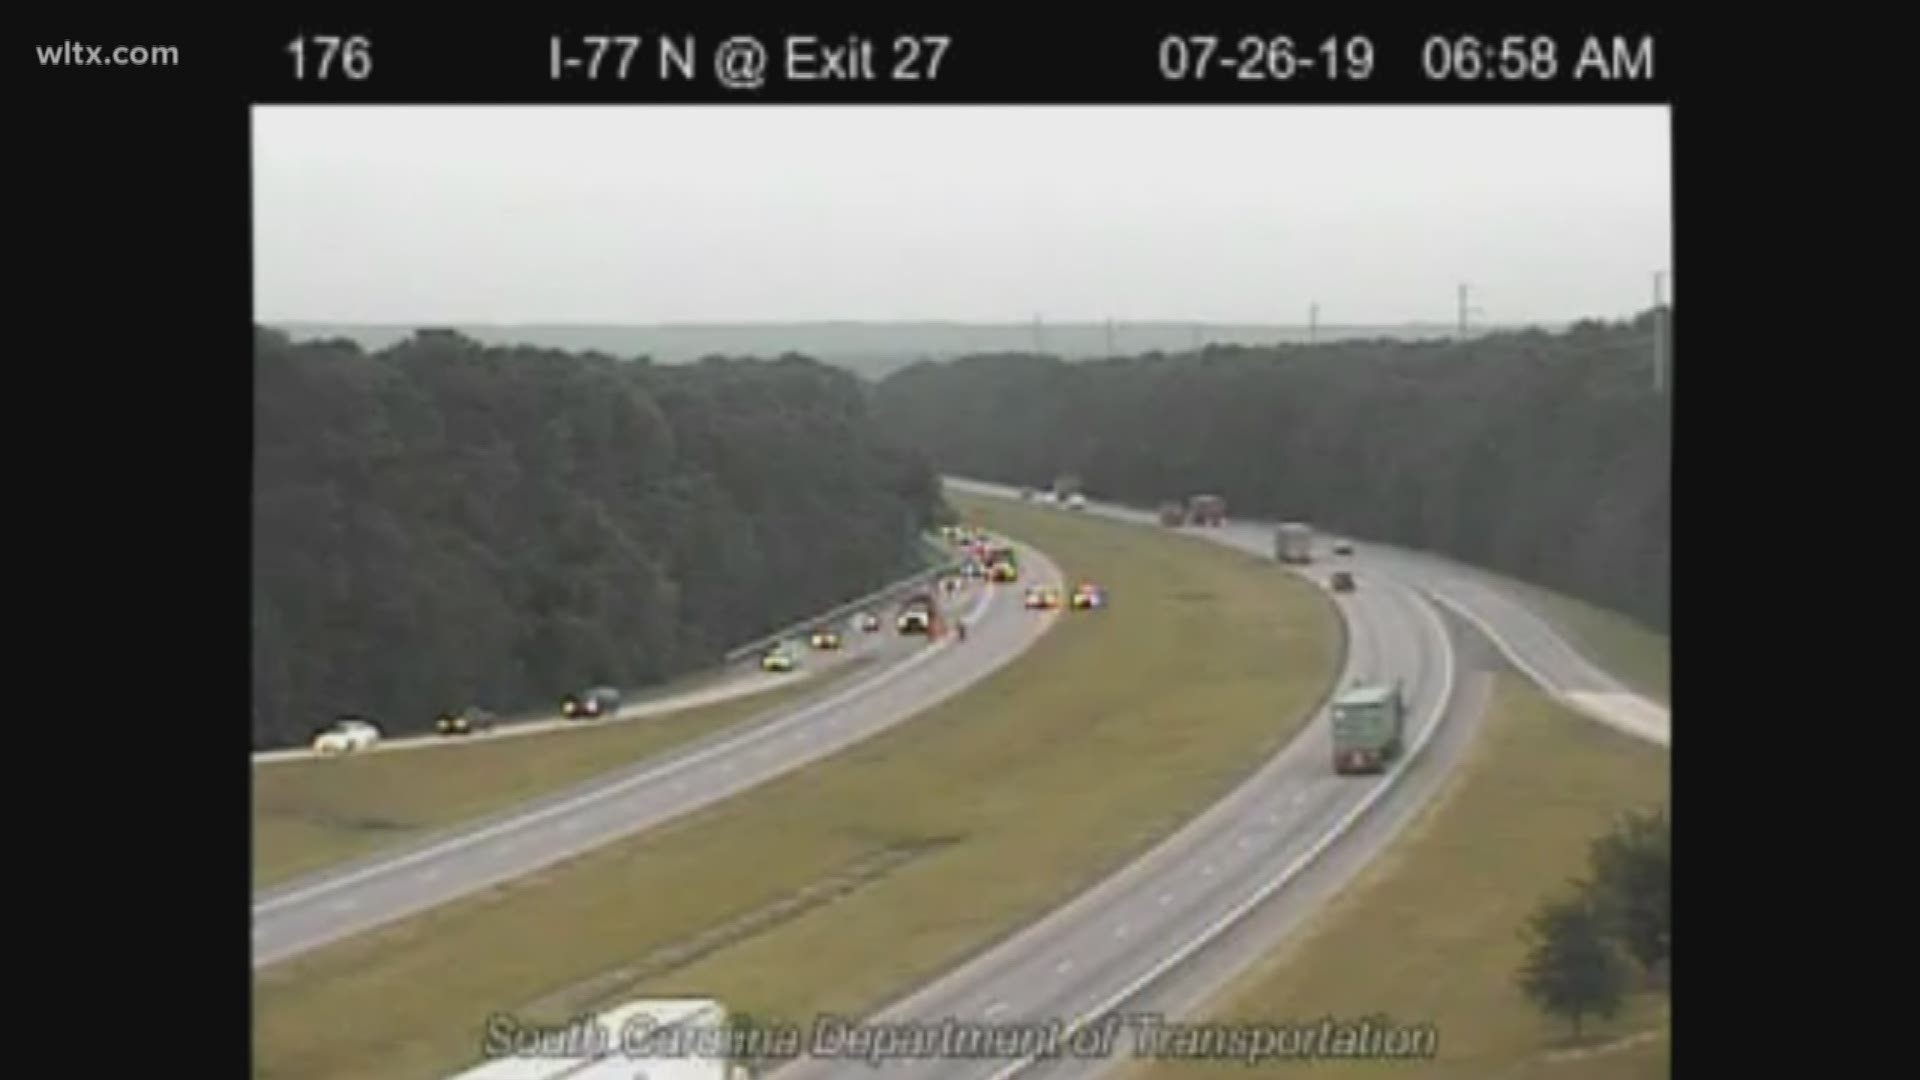 According to Highway Patrol, at least two people have been killed in a crash on I-77 South near exit 26 on Friday morning. A detour has been set up at exit 27.